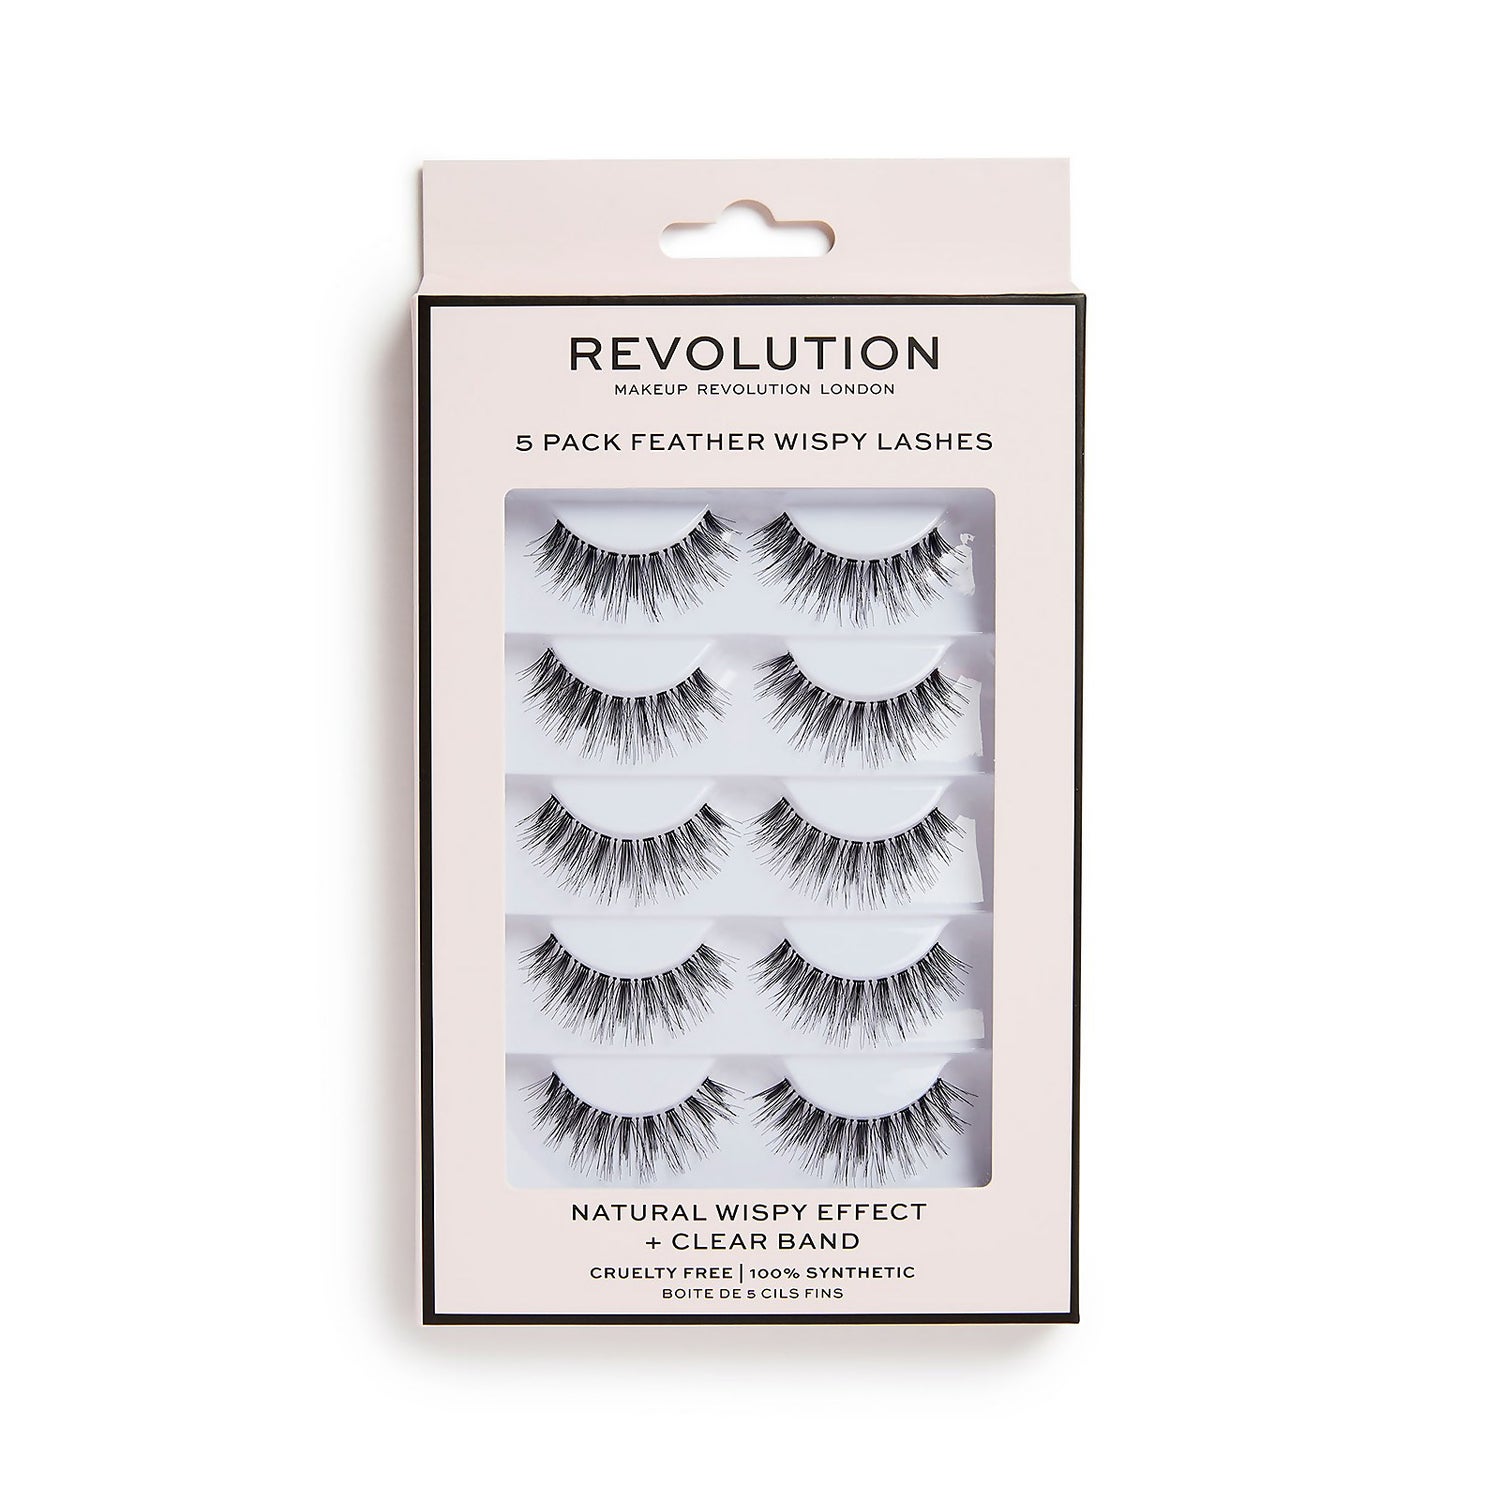 Makeup Revolution 5 Pack Feather Wispy Lashes